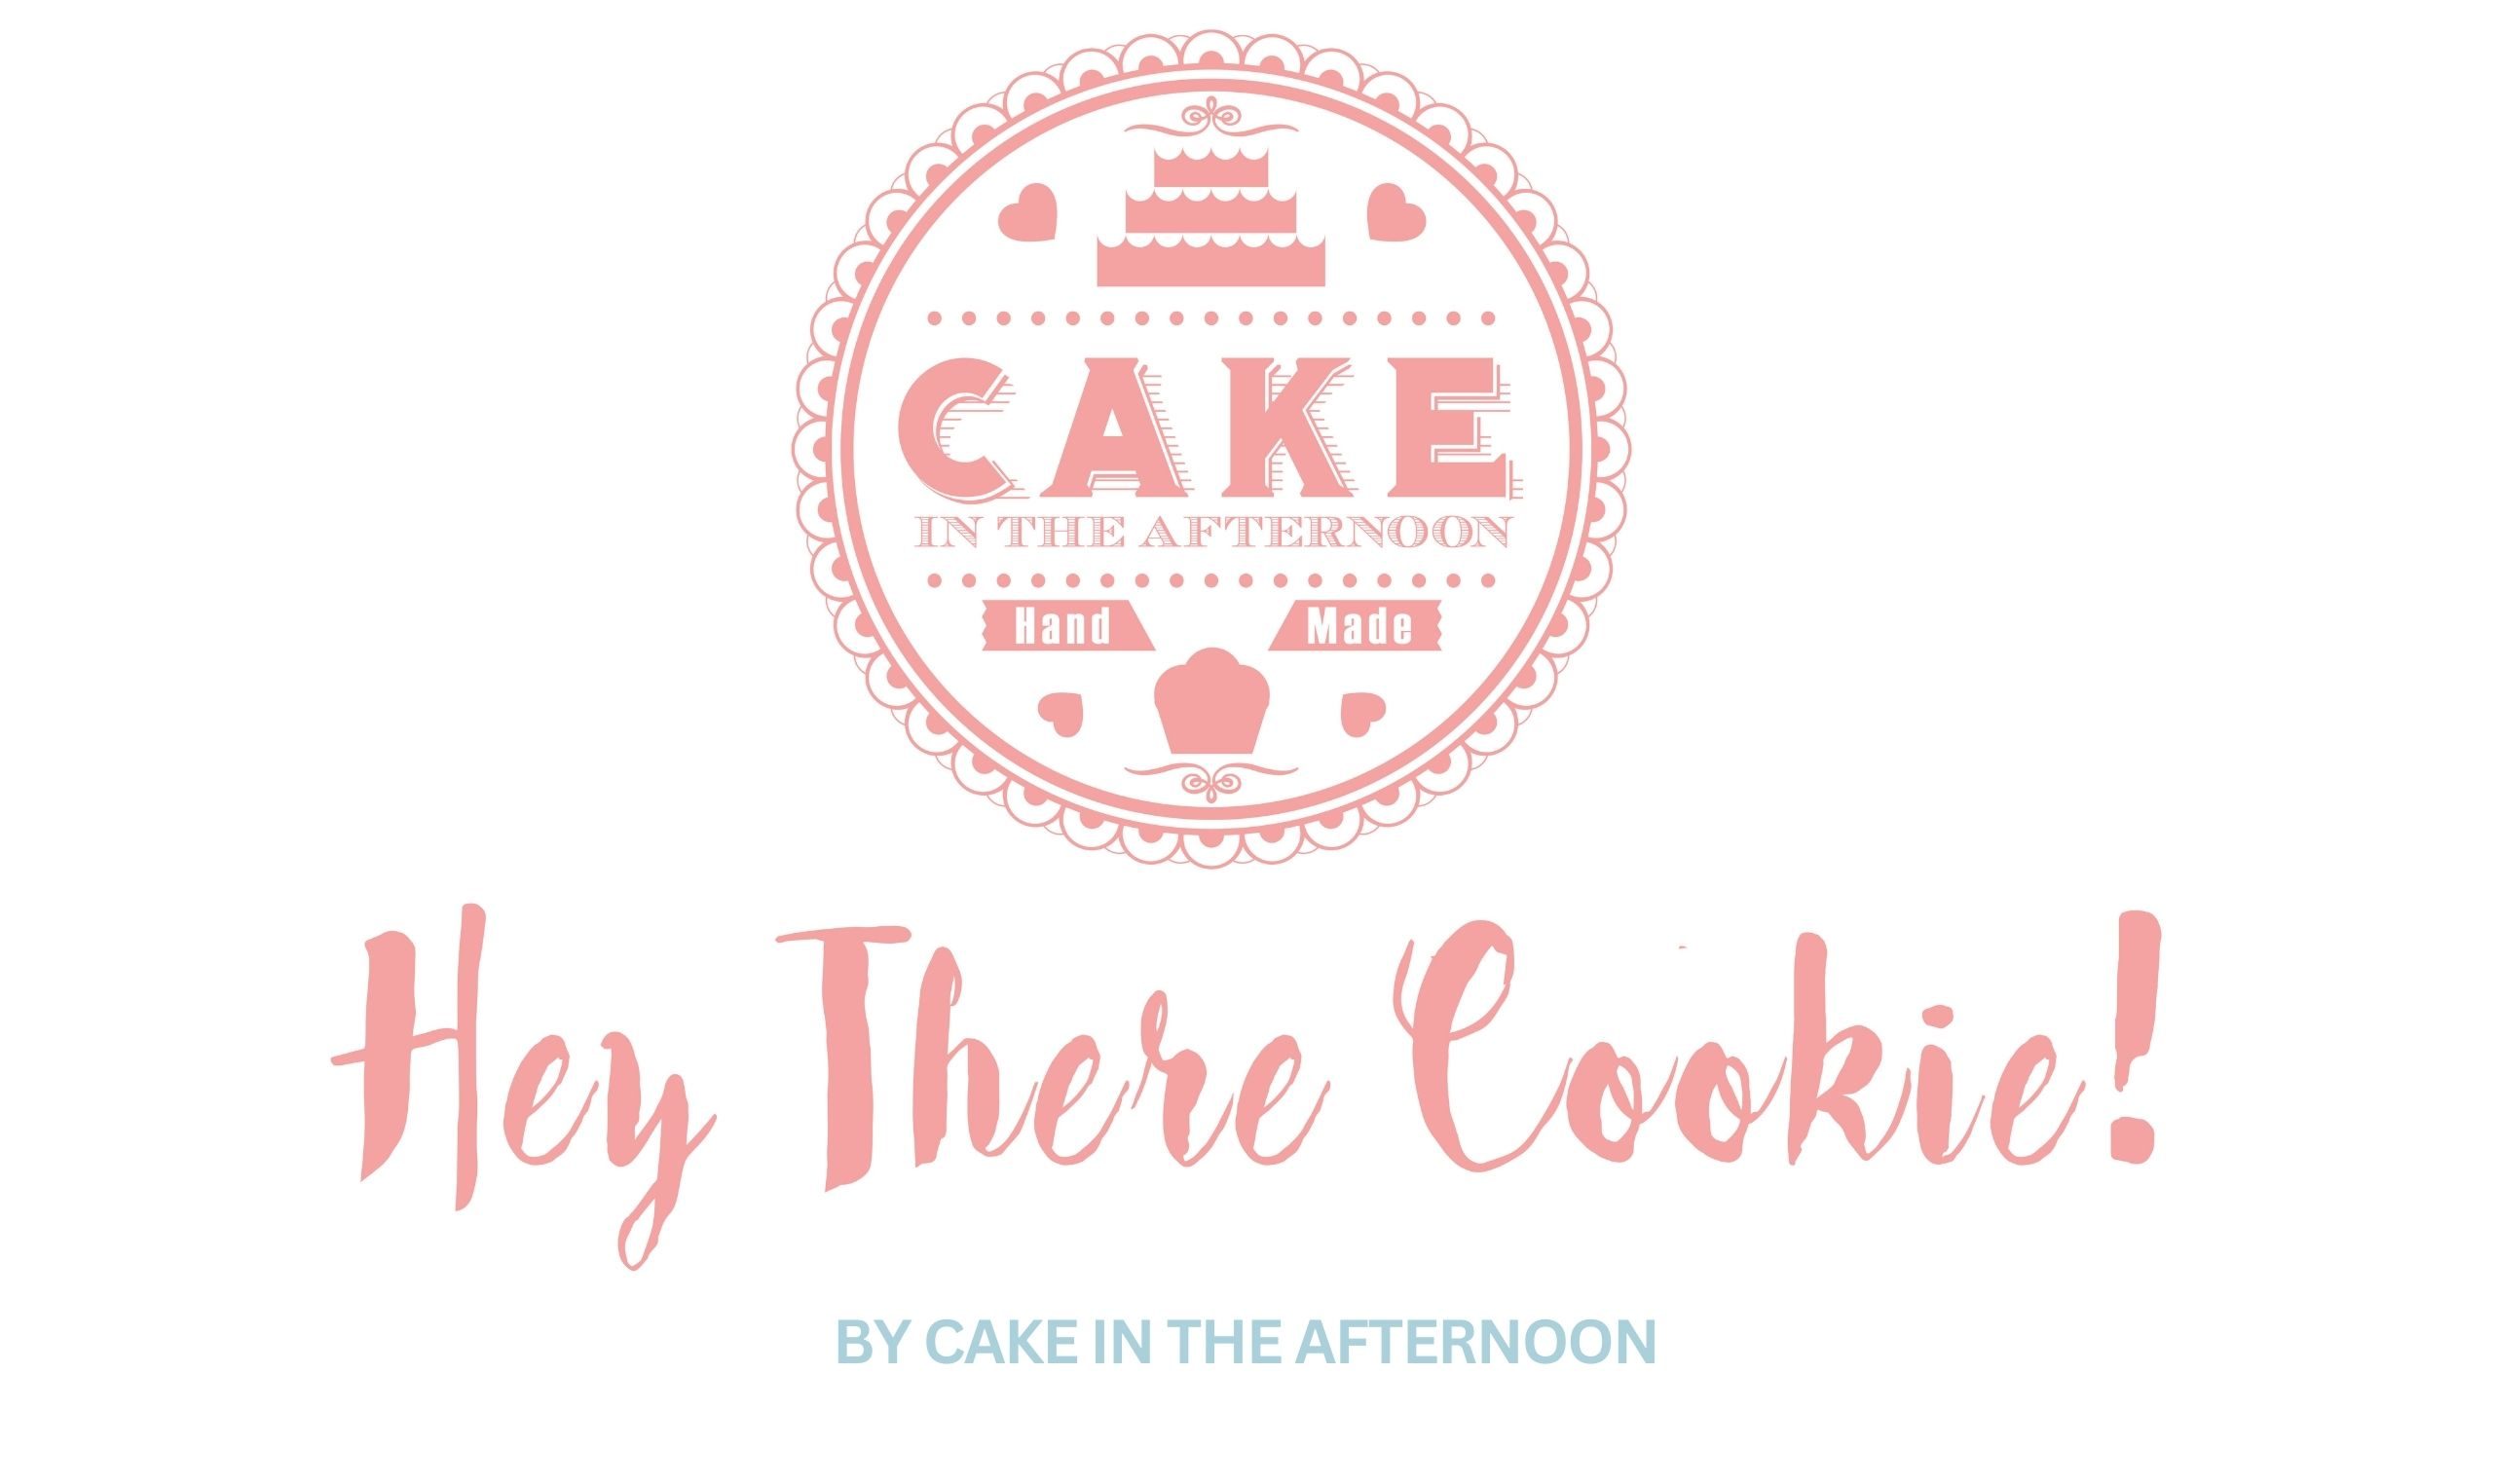 CAKE IN THE AFTERNOON – Made In Melbourne